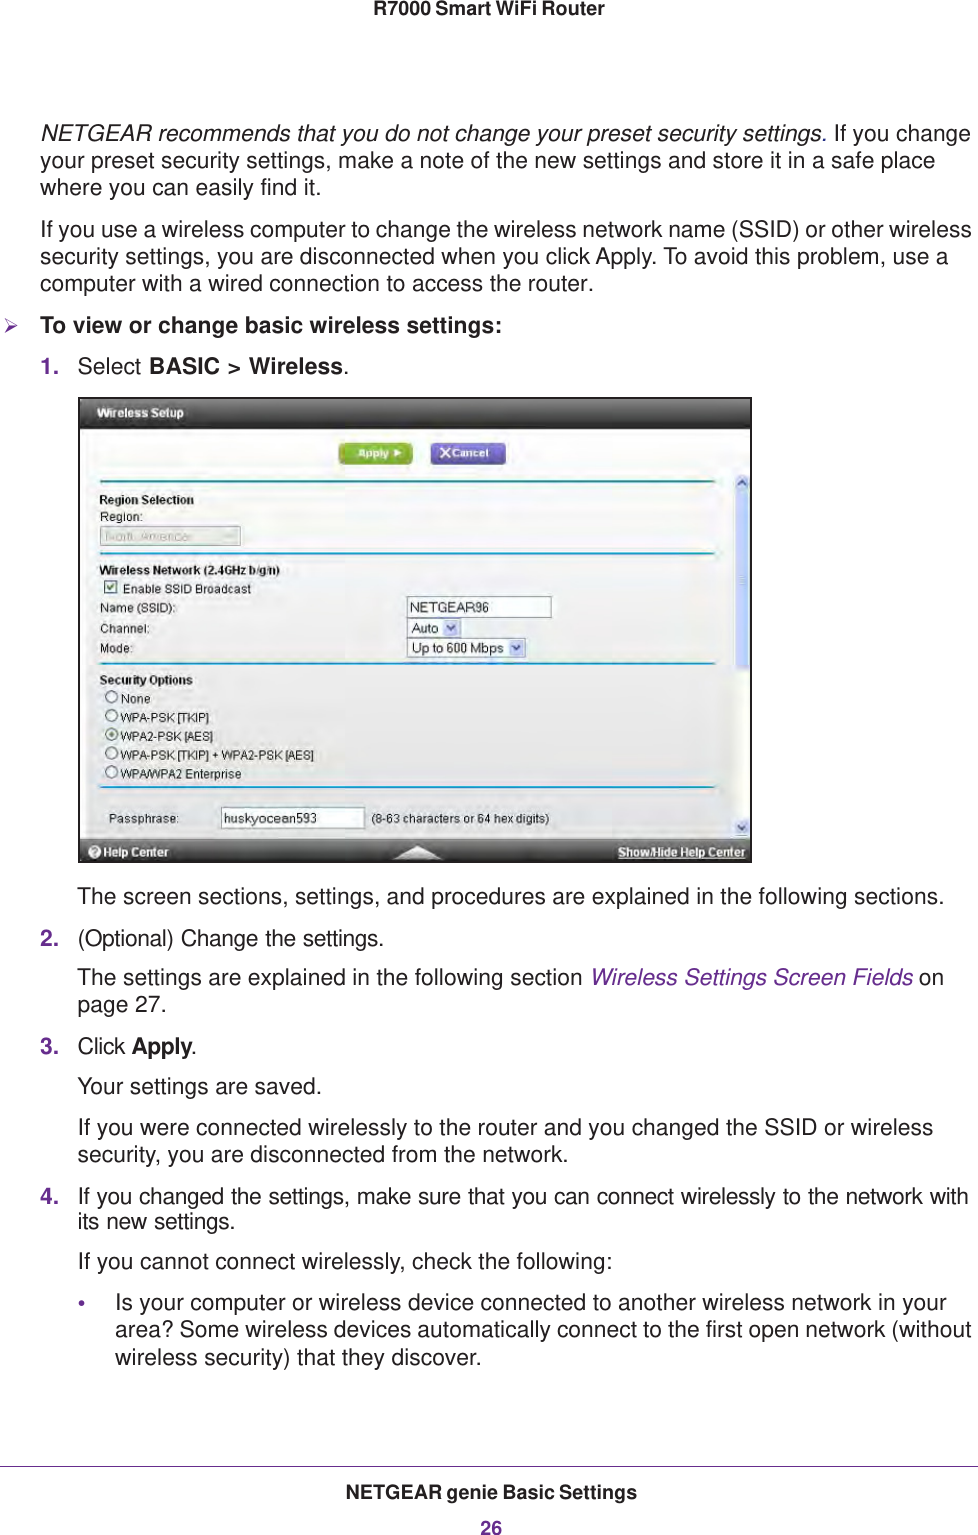 NETGEAR genie Basic Settings26R7000 Smart WiFi Router NETGEAR recommends that you do not change your preset security settings. If you change your preset security settings, make a note of the new settings and store it in a safe place where you can easily find it.If you use a wireless computer to change the wireless network name (SSID) or other wireless security settings, you are disconnected when you click Apply. To avoid this problem, use a computer with a wired connection to access the router.To view or change basic wireless settings:1. Select BASIC &gt; Wireless.The screen sections, settings, and procedures are explained in the following sections.2. (Optional) Change the settings.The settings are explained in the following section Wireless Settings Screen Fields on page  27.3. Click Apply.Your settings are saved.If you were connected wirelessly to the router and you changed the SSID or wireless security, you are disconnected from the network.4. If you changed the settings, make sure that you can connect wirelessly to the network with its new settings. If you cannot connect wirelessly, check the following:•Is your computer or wireless device connected to another wireless network in your area? Some wireless devices automatically connect to the first open network (without wireless security) that they discover.